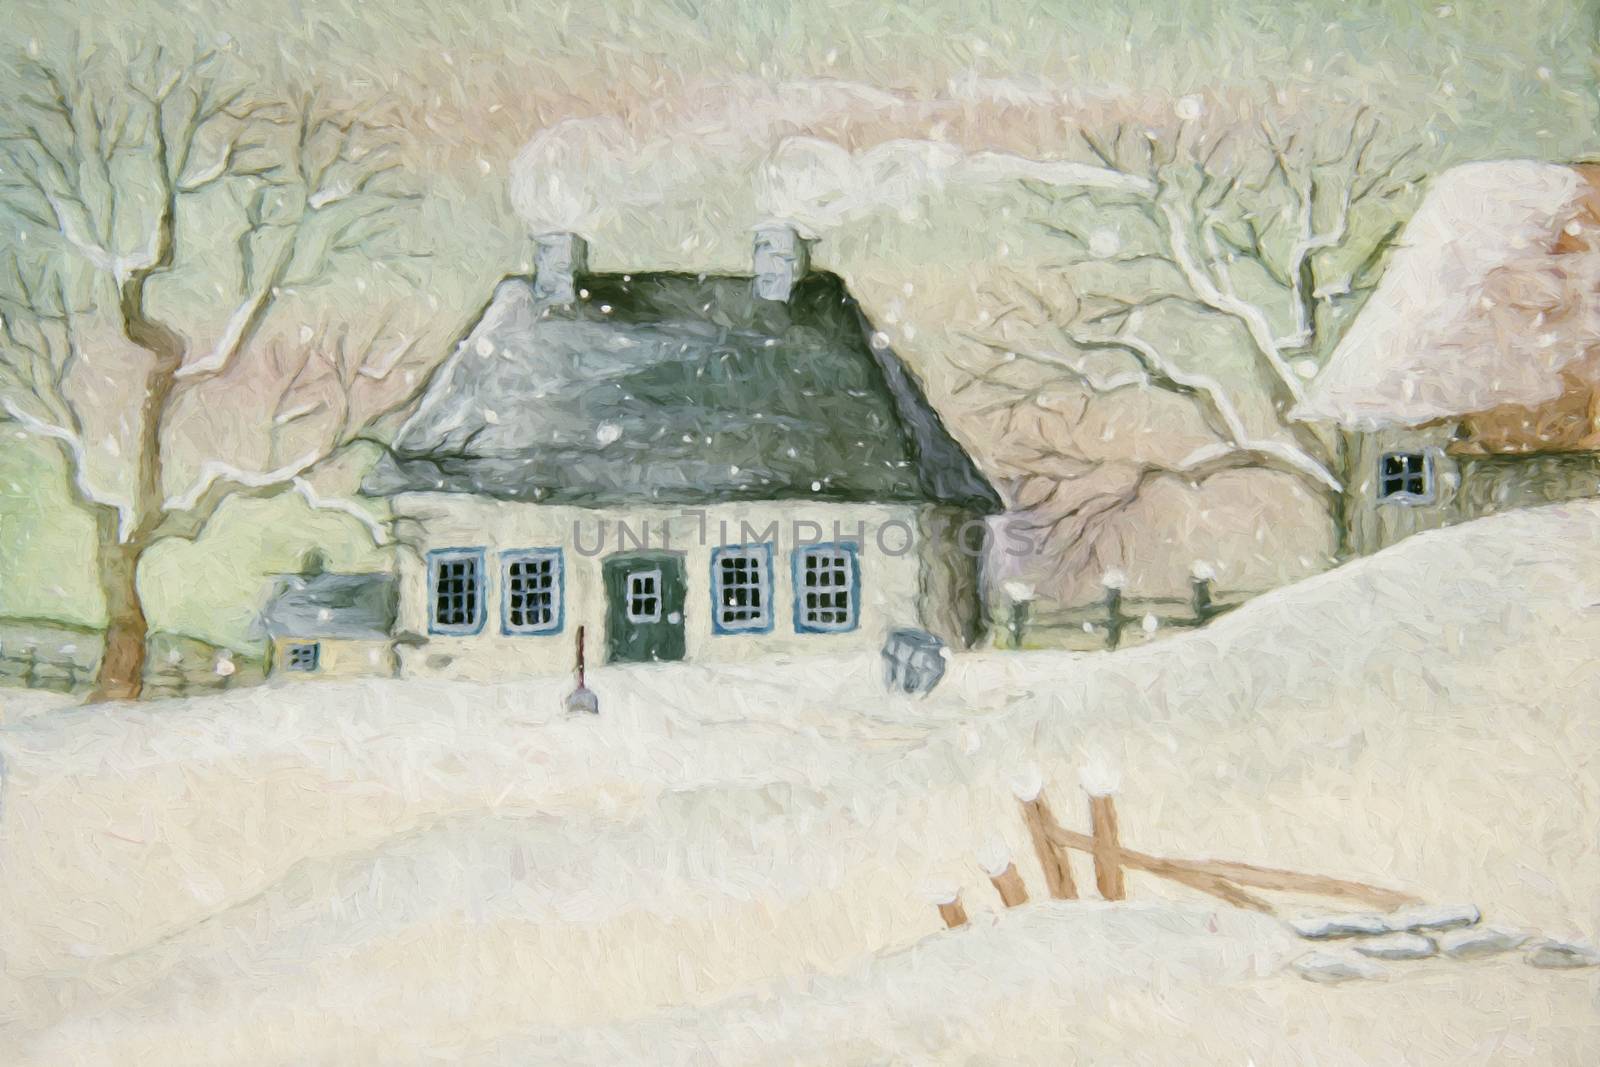 Old house in the snow, painted digitally